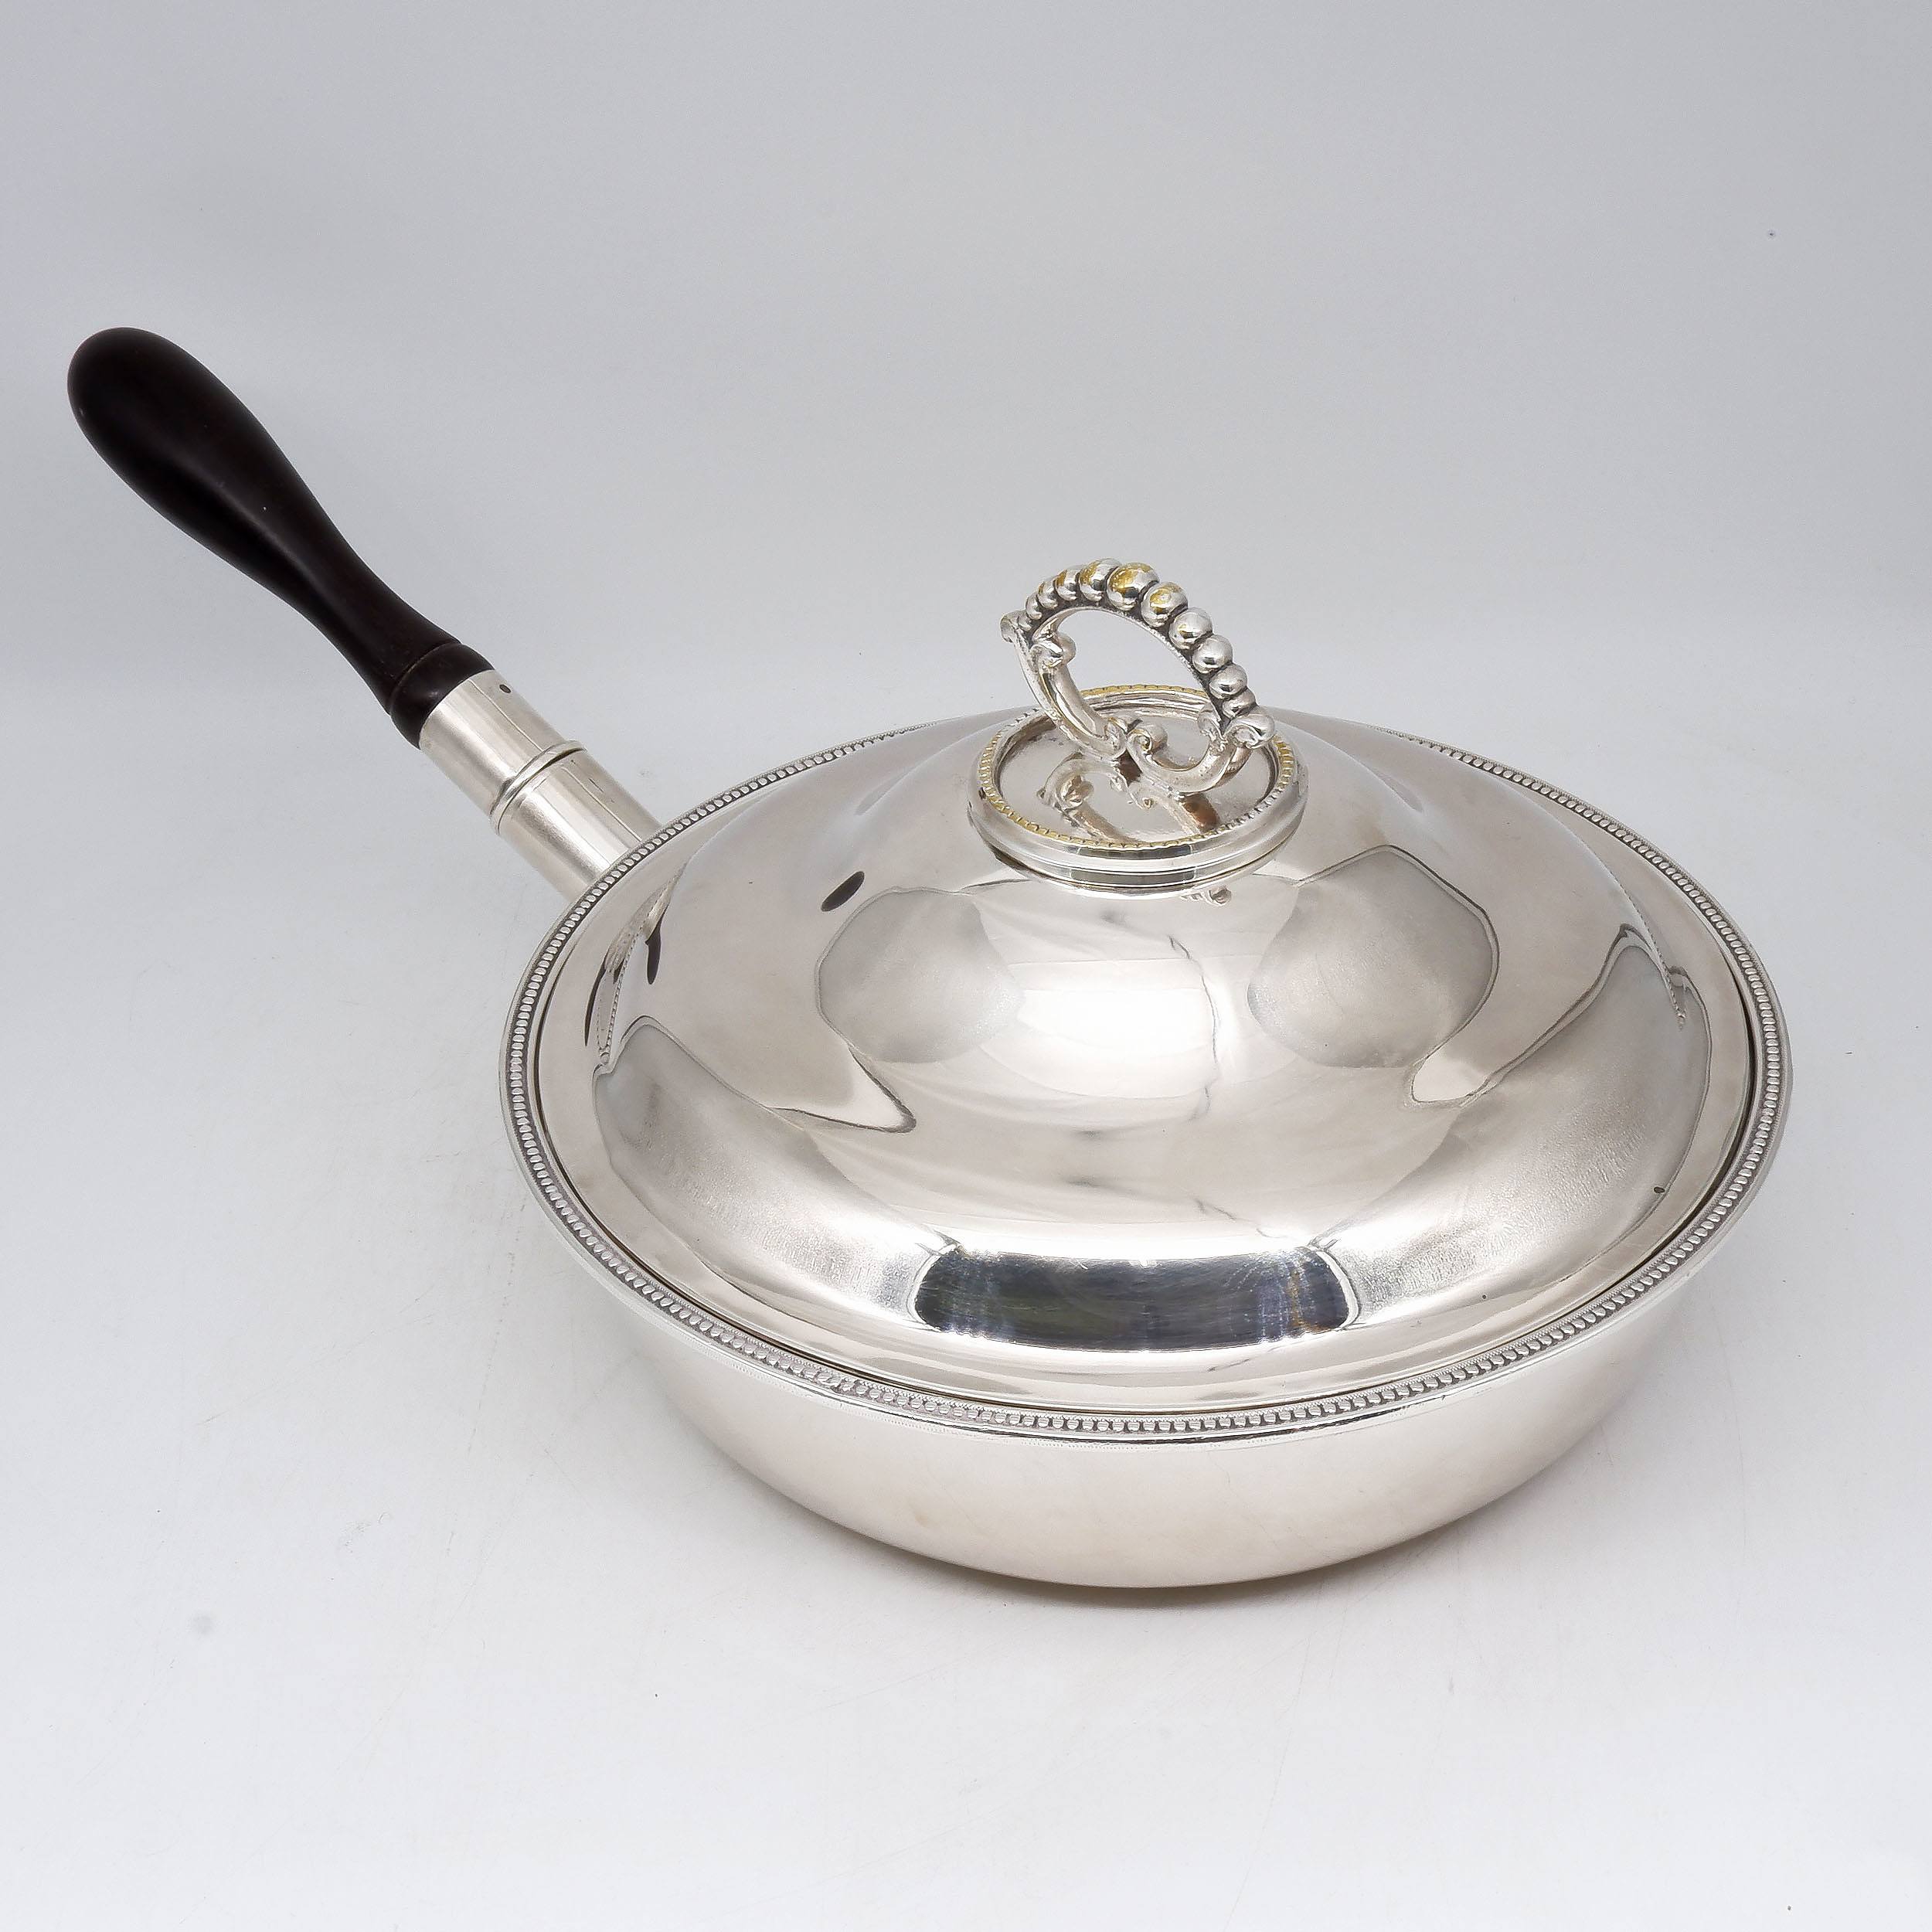 'Antique Silver Plated Warming Pan'